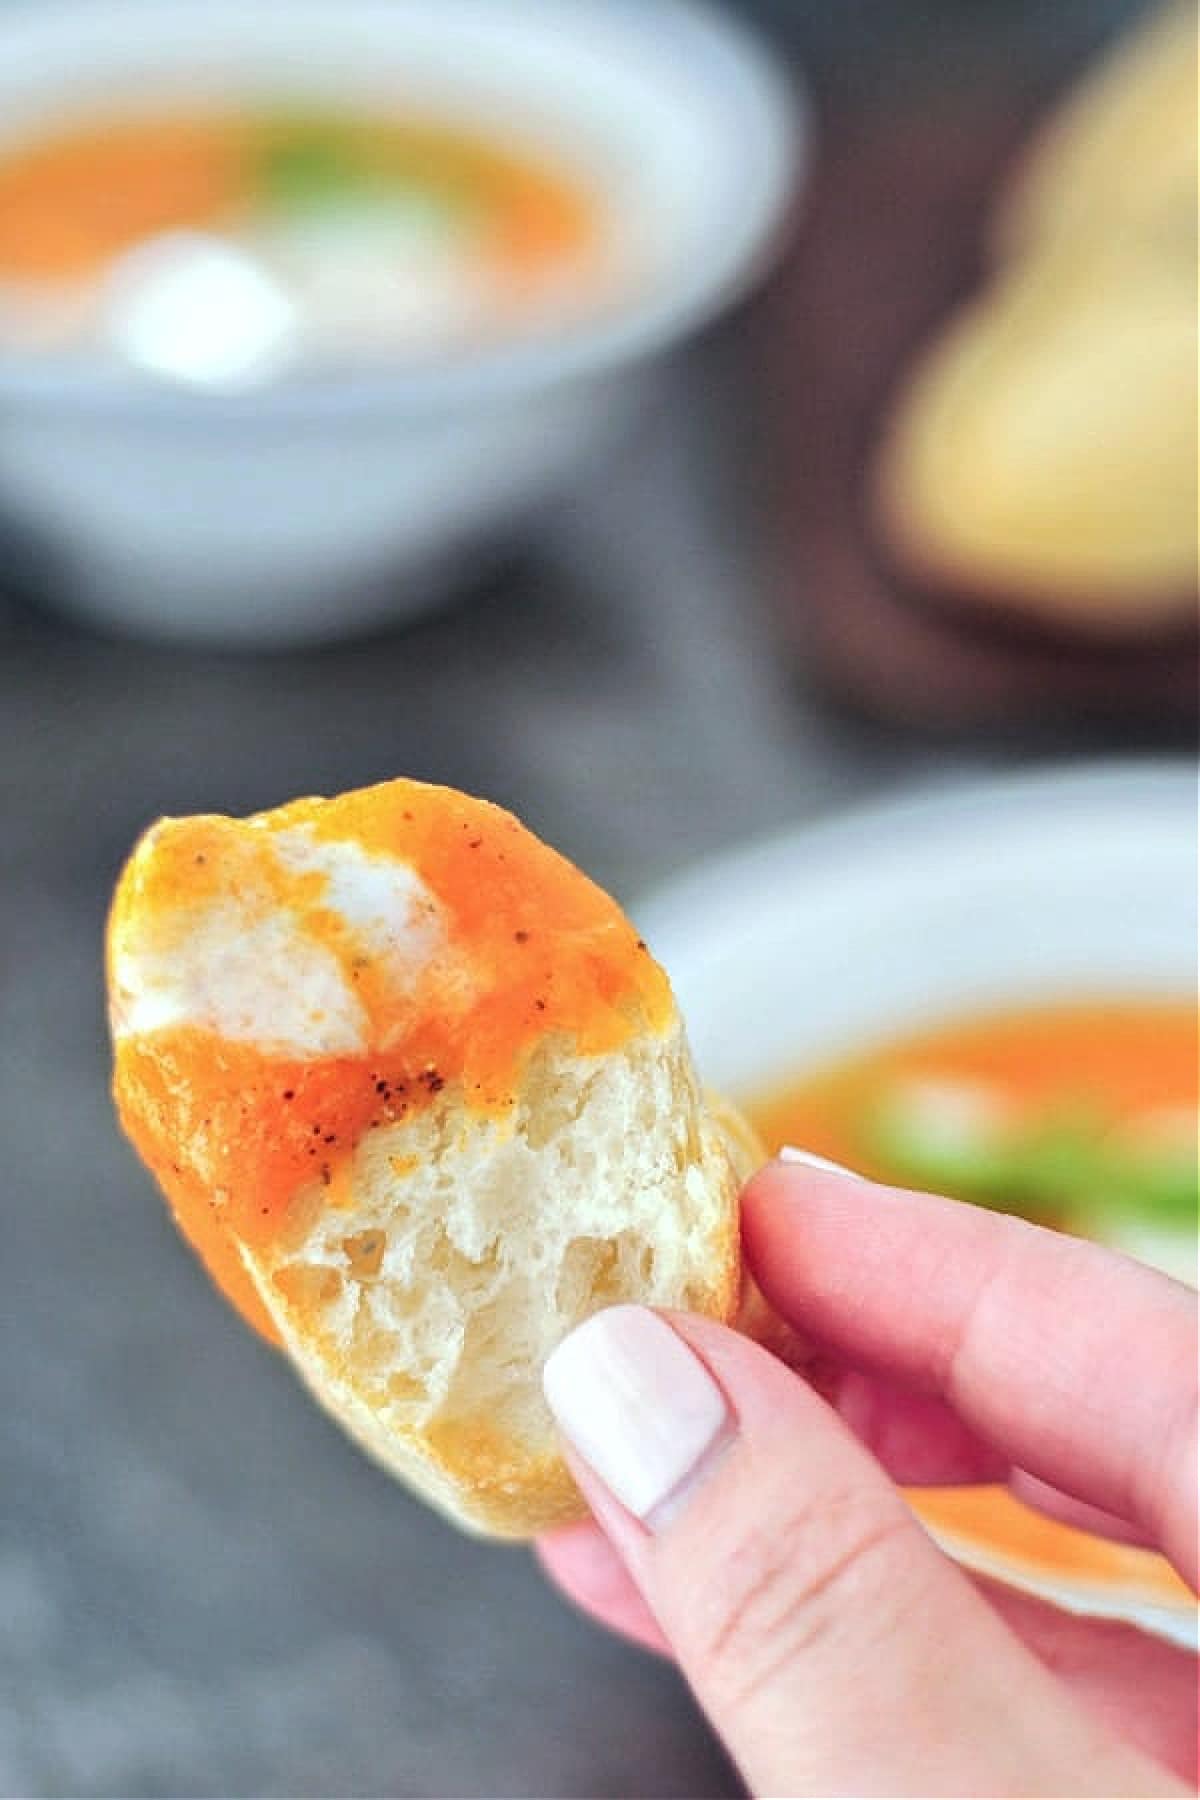 A hand holding a slice of crusty bread dipped into bright orange sweet potato soup.